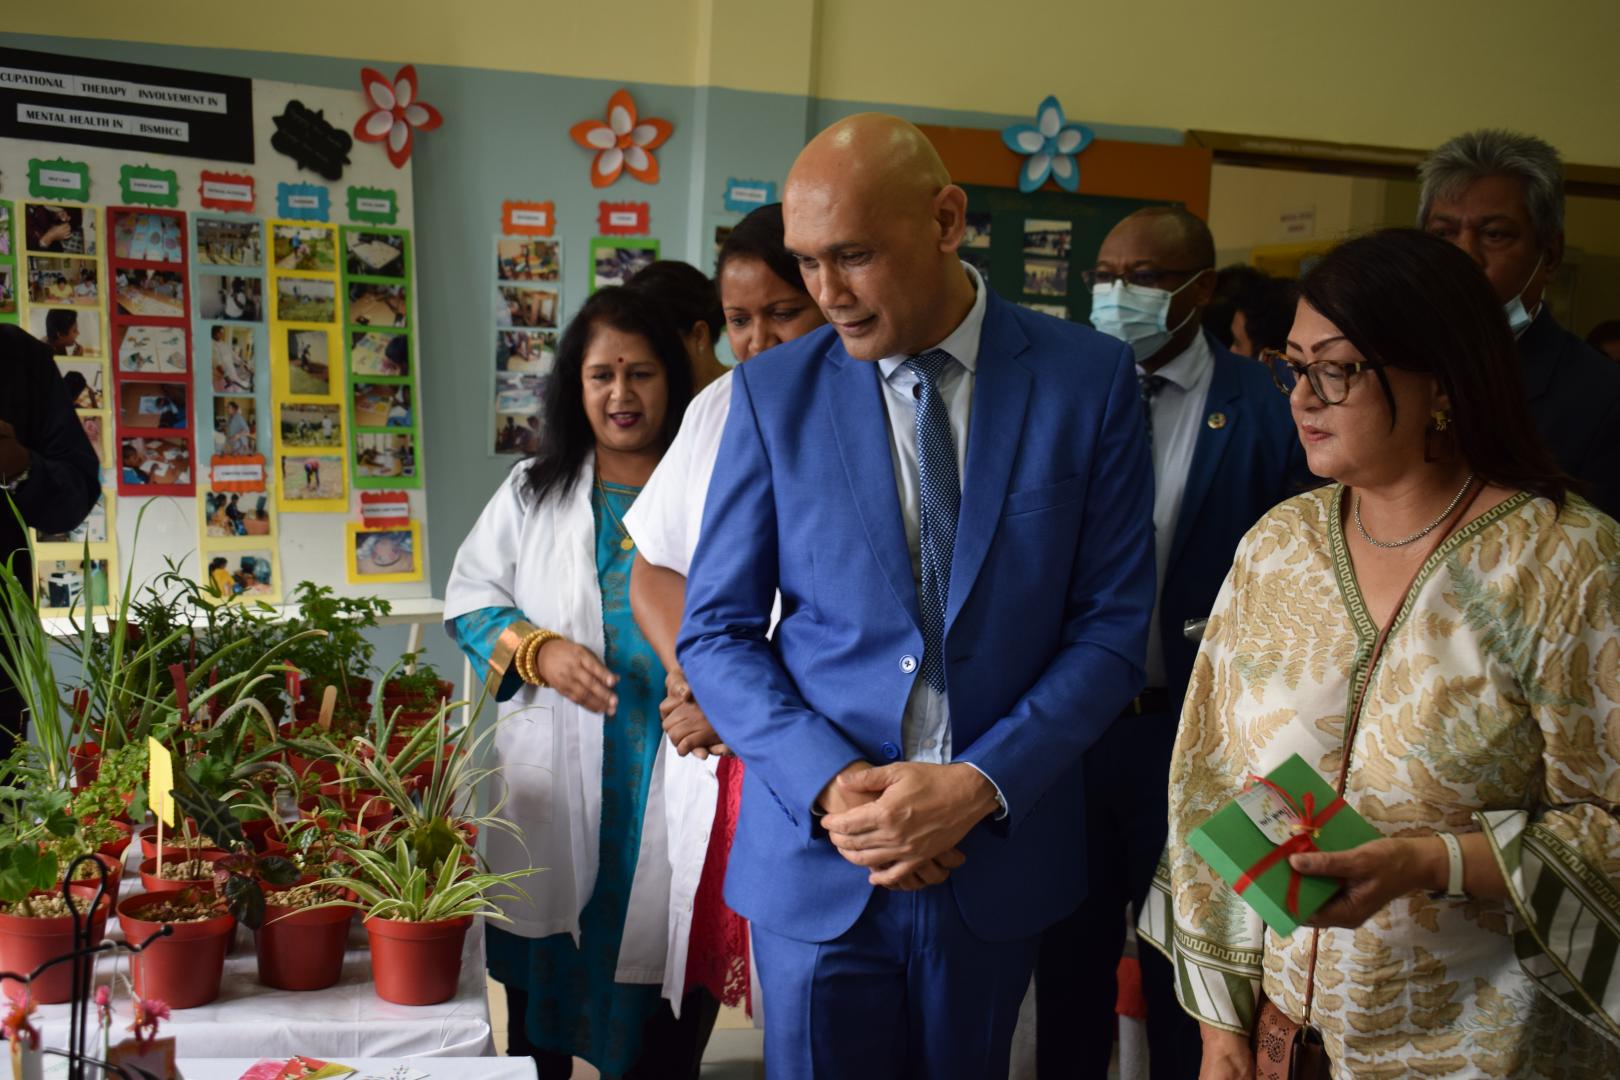 World Mental Health Day 2020 marked on 08 October in Mauritius: exhibition of handy crafts and plants by patients